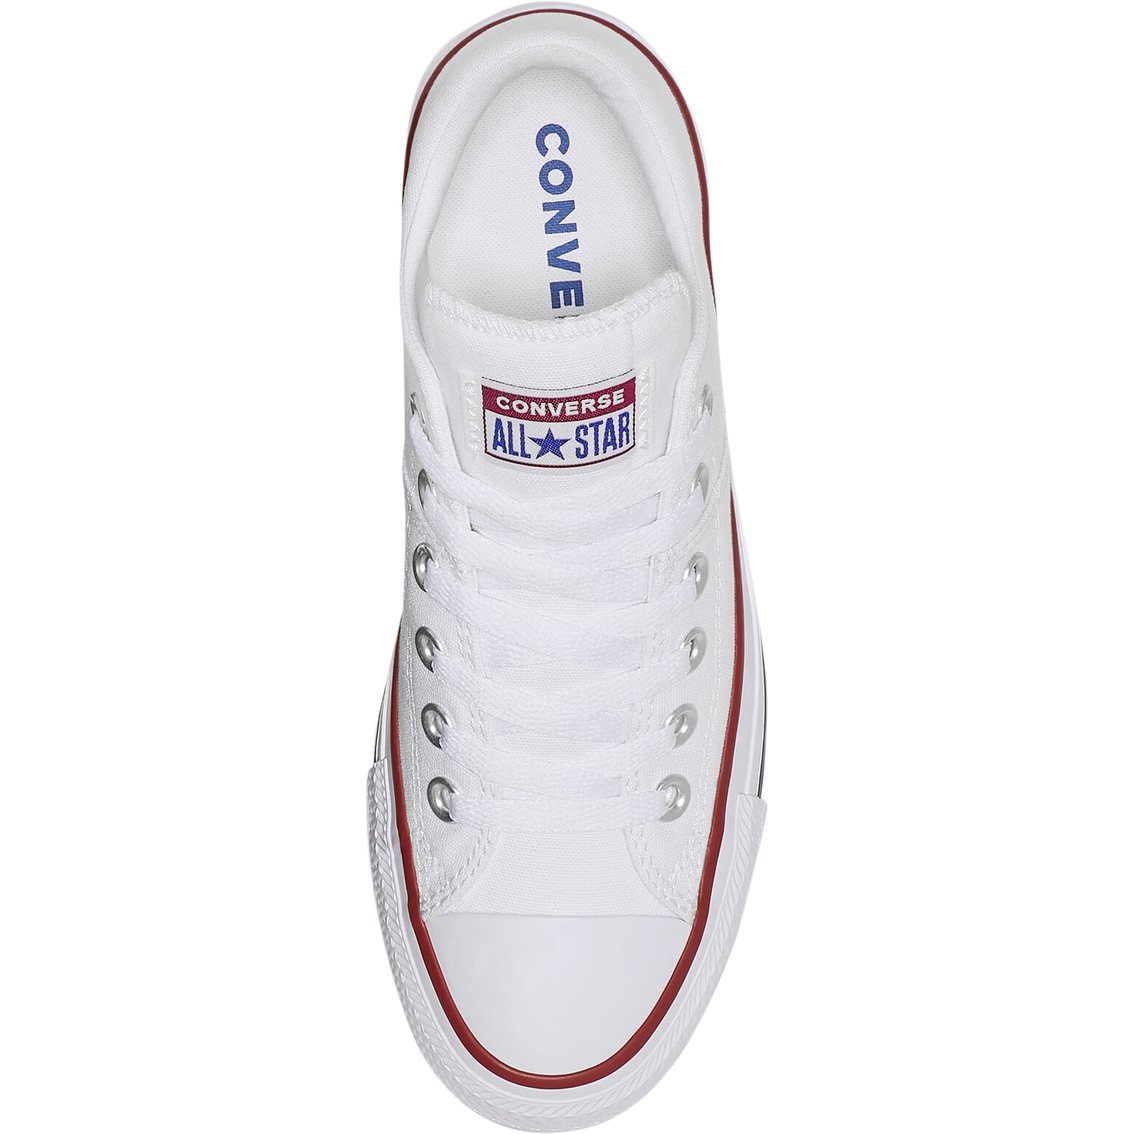 Converse Women's Chuck Taylor All Star Madison Low Top Sneakers - Image 5 of 7